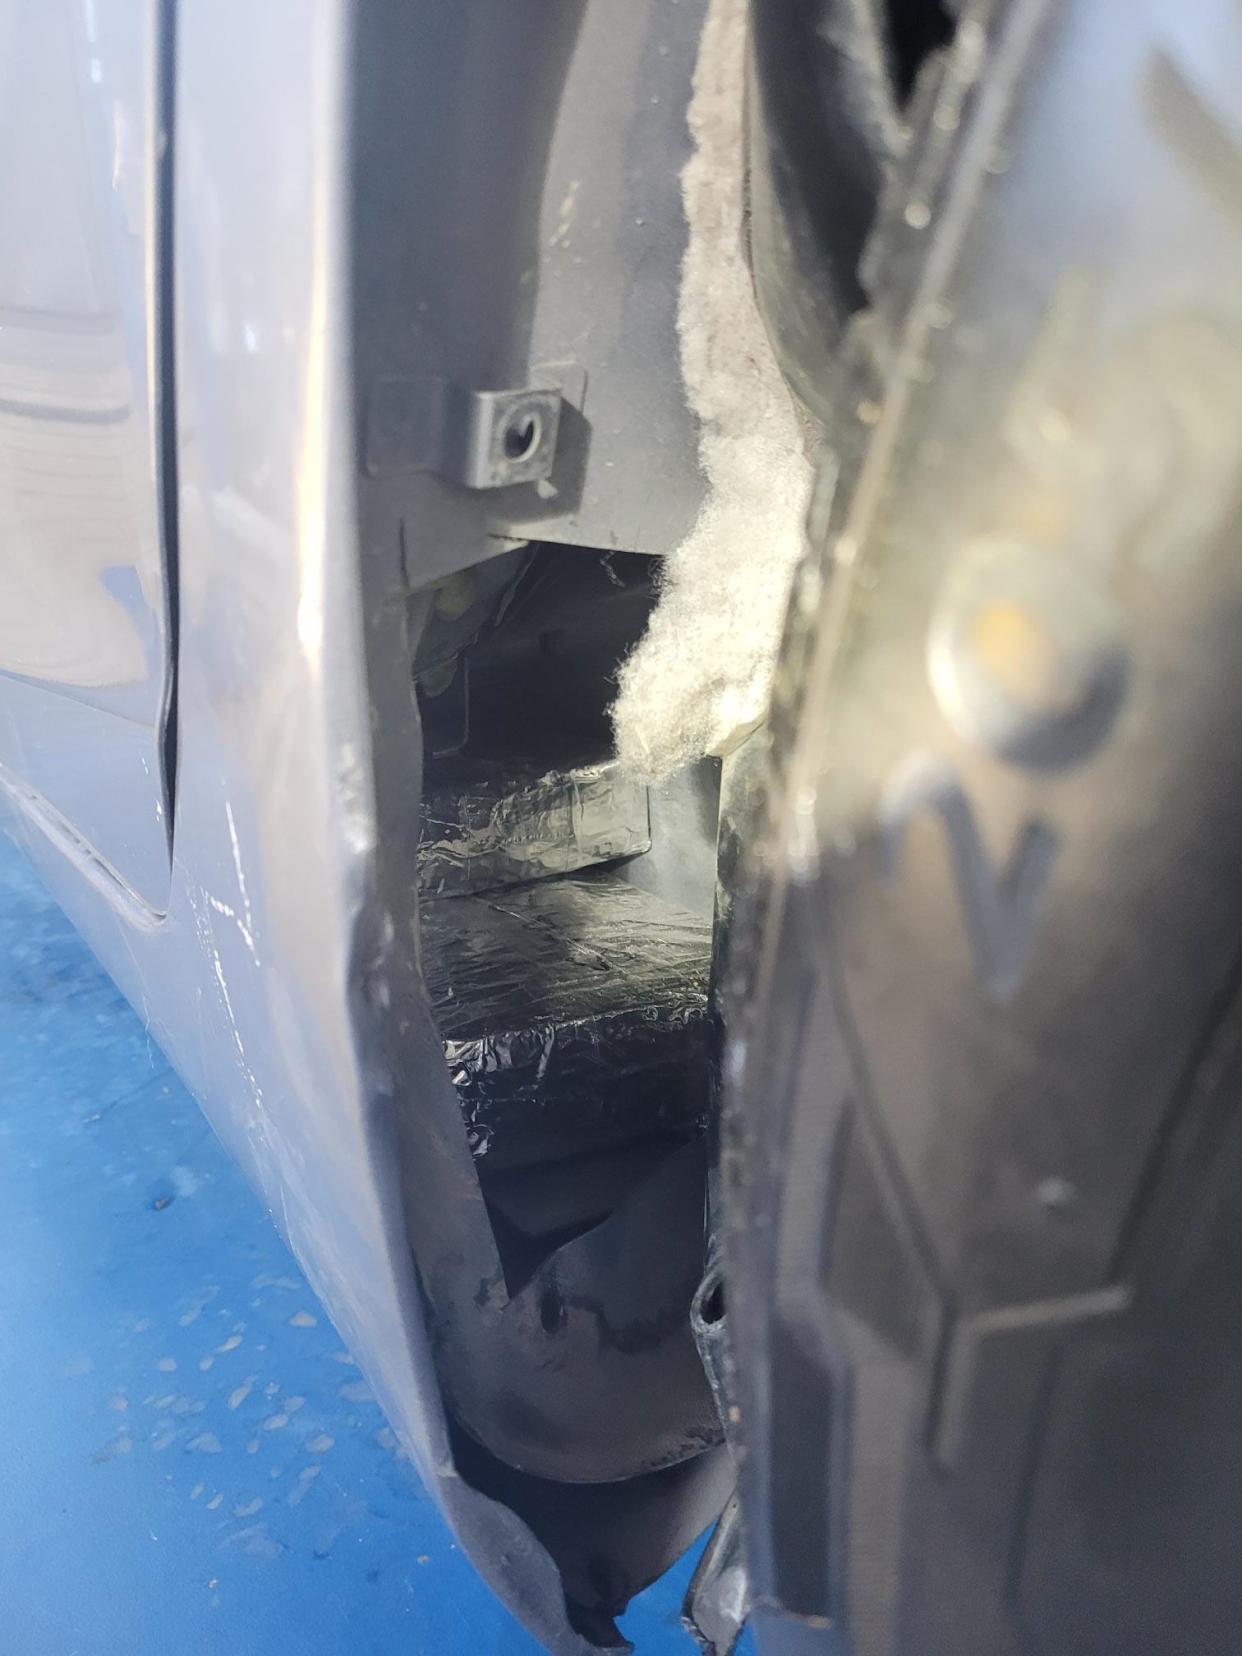 U.S. Custom and Border Protection officers seized 42.5 pounds of cocaine hidden in the rocker panels of the car April 30, 2024, at the Bridge of the Americas port of entry.